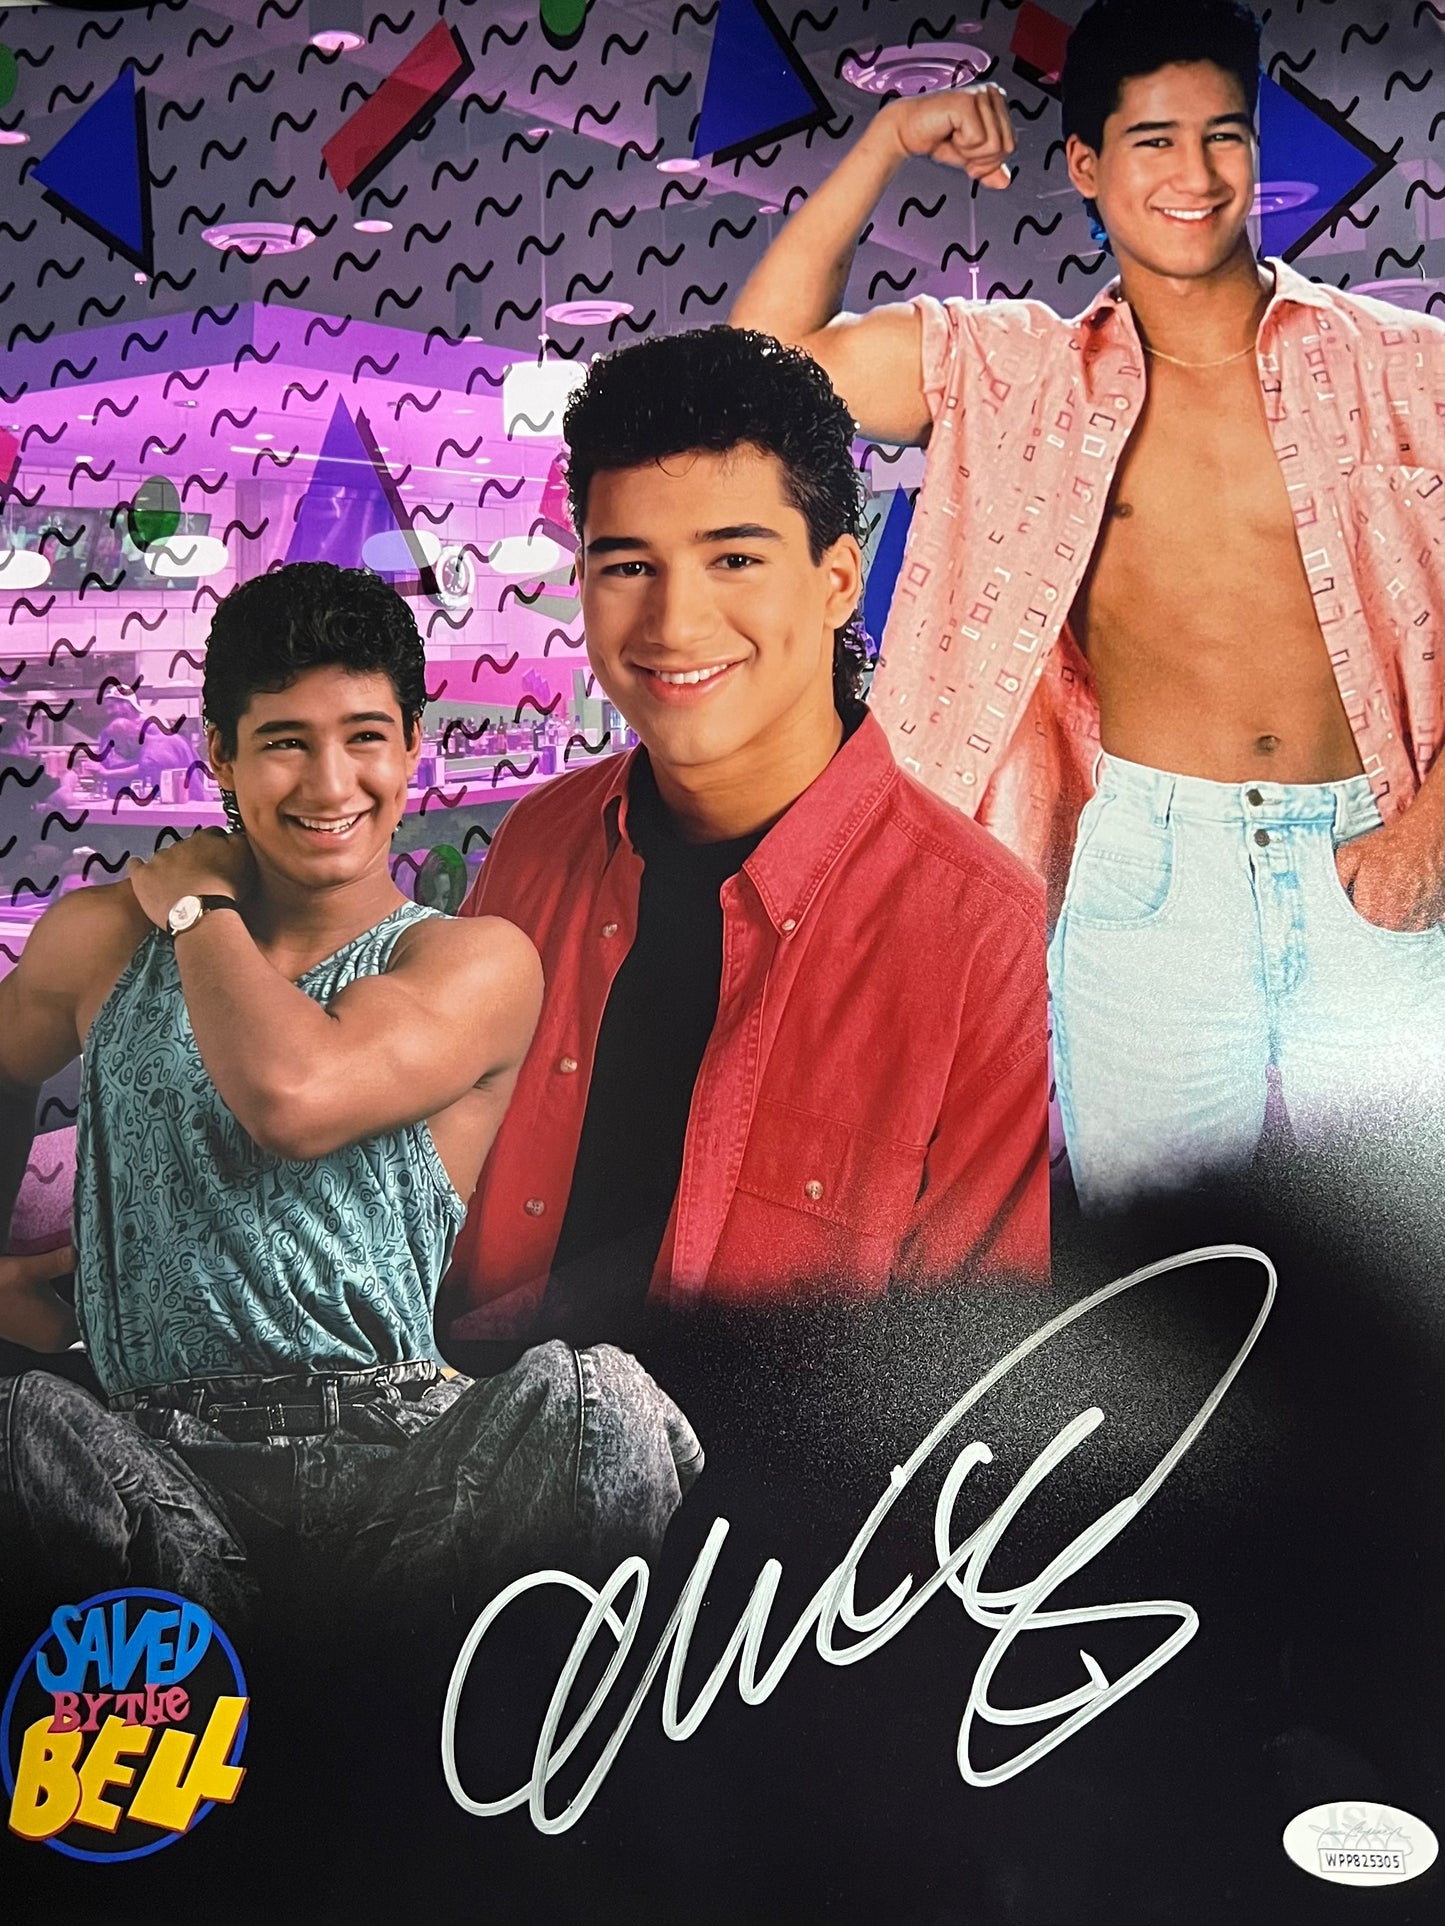 Saved By The Bell Mario Lopez Signed 11x14 with JSA COA